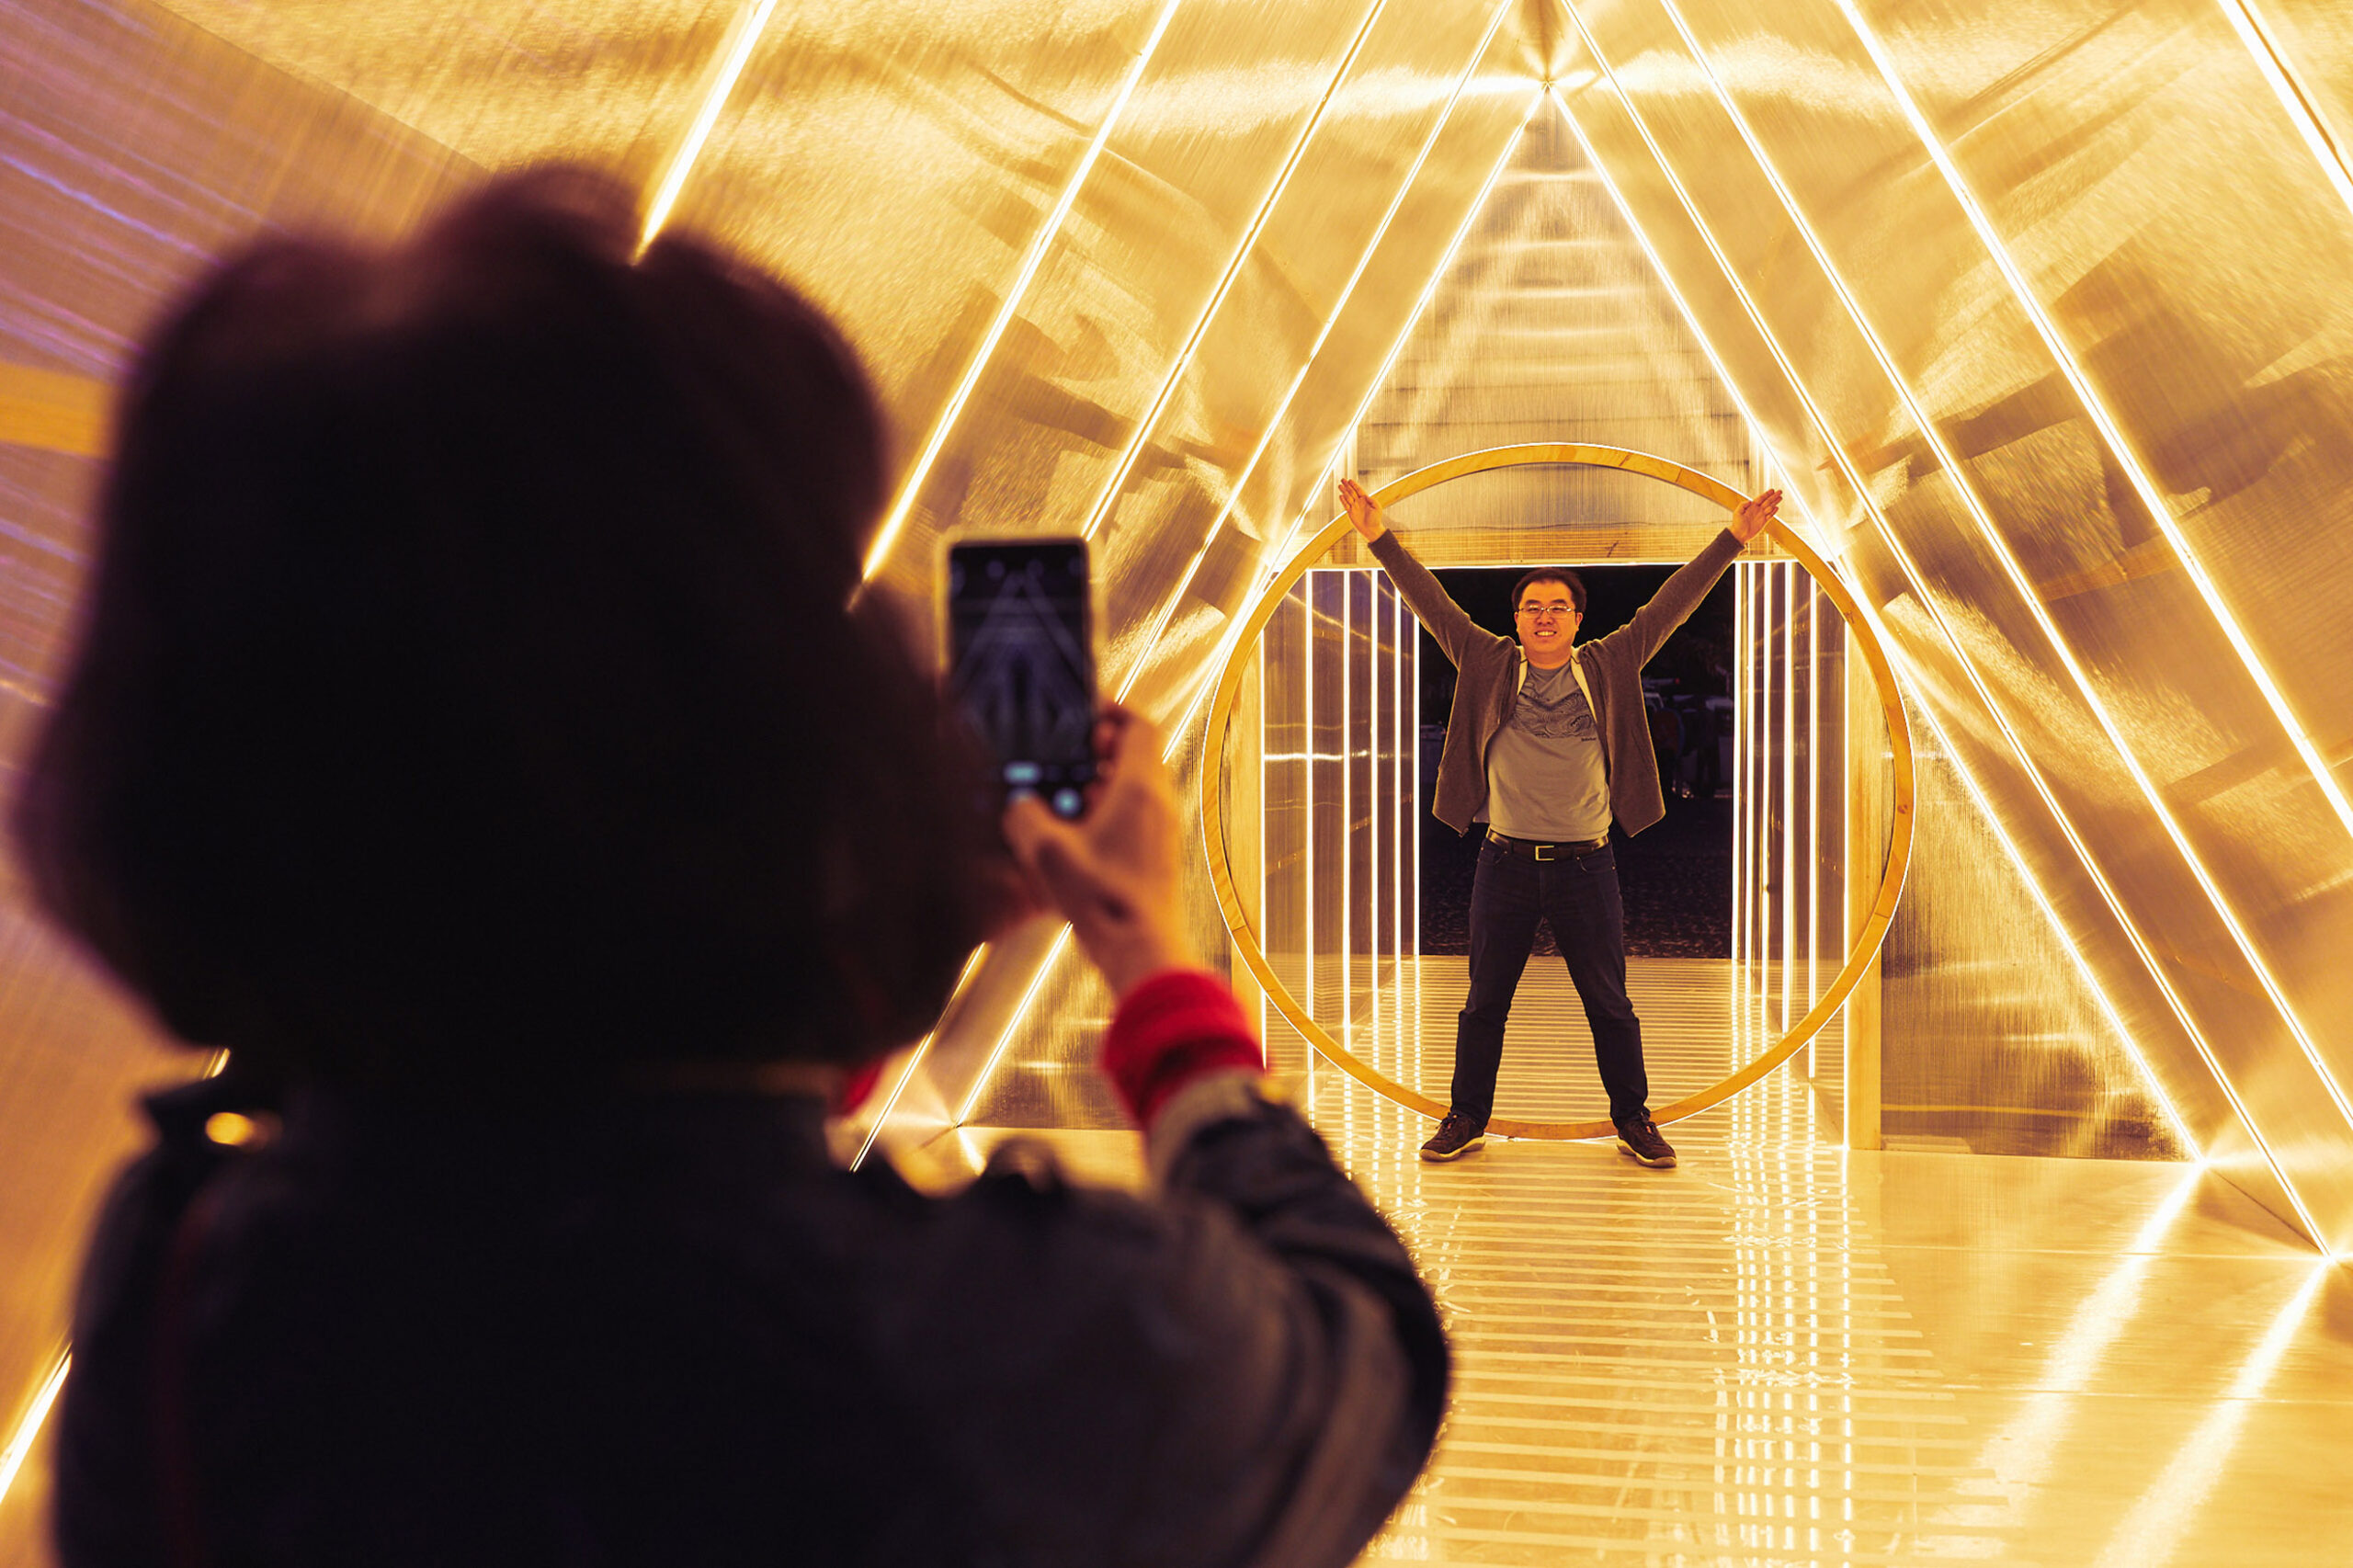 A person is photographed inside a brightly lit triangular tunnel